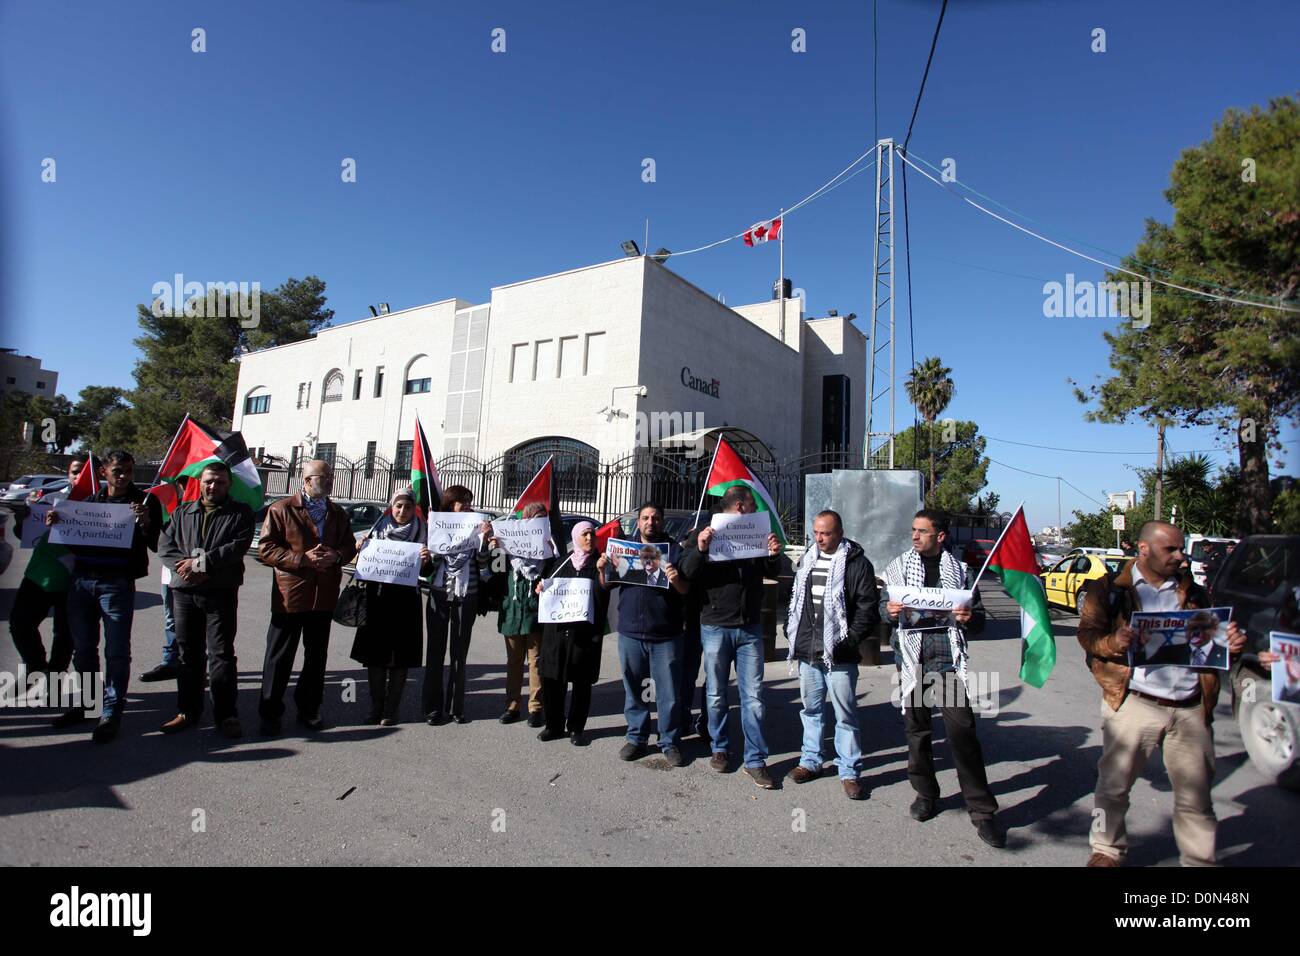 Nov. 28, 2012 - Ramallah, West Bank, Palestinian Territory - Palestinians hold national flags and a poster of Canadian Prime Minister Stephen Harper superimposed with a face of a dog during a protest following his remarks about the Palestinian UN bid for an observer state status, in front of Canadian representative offices in the West bank city of Ramallah, Wednesday, Nov. 28, 2012. Harper has threatened ''there will be consequences'' if Palestinian Authority President Mahmoud Abbas does not end his campaign for the Palestinian Authority to be recognized by the UN as a non-member observer stat Stock Photo